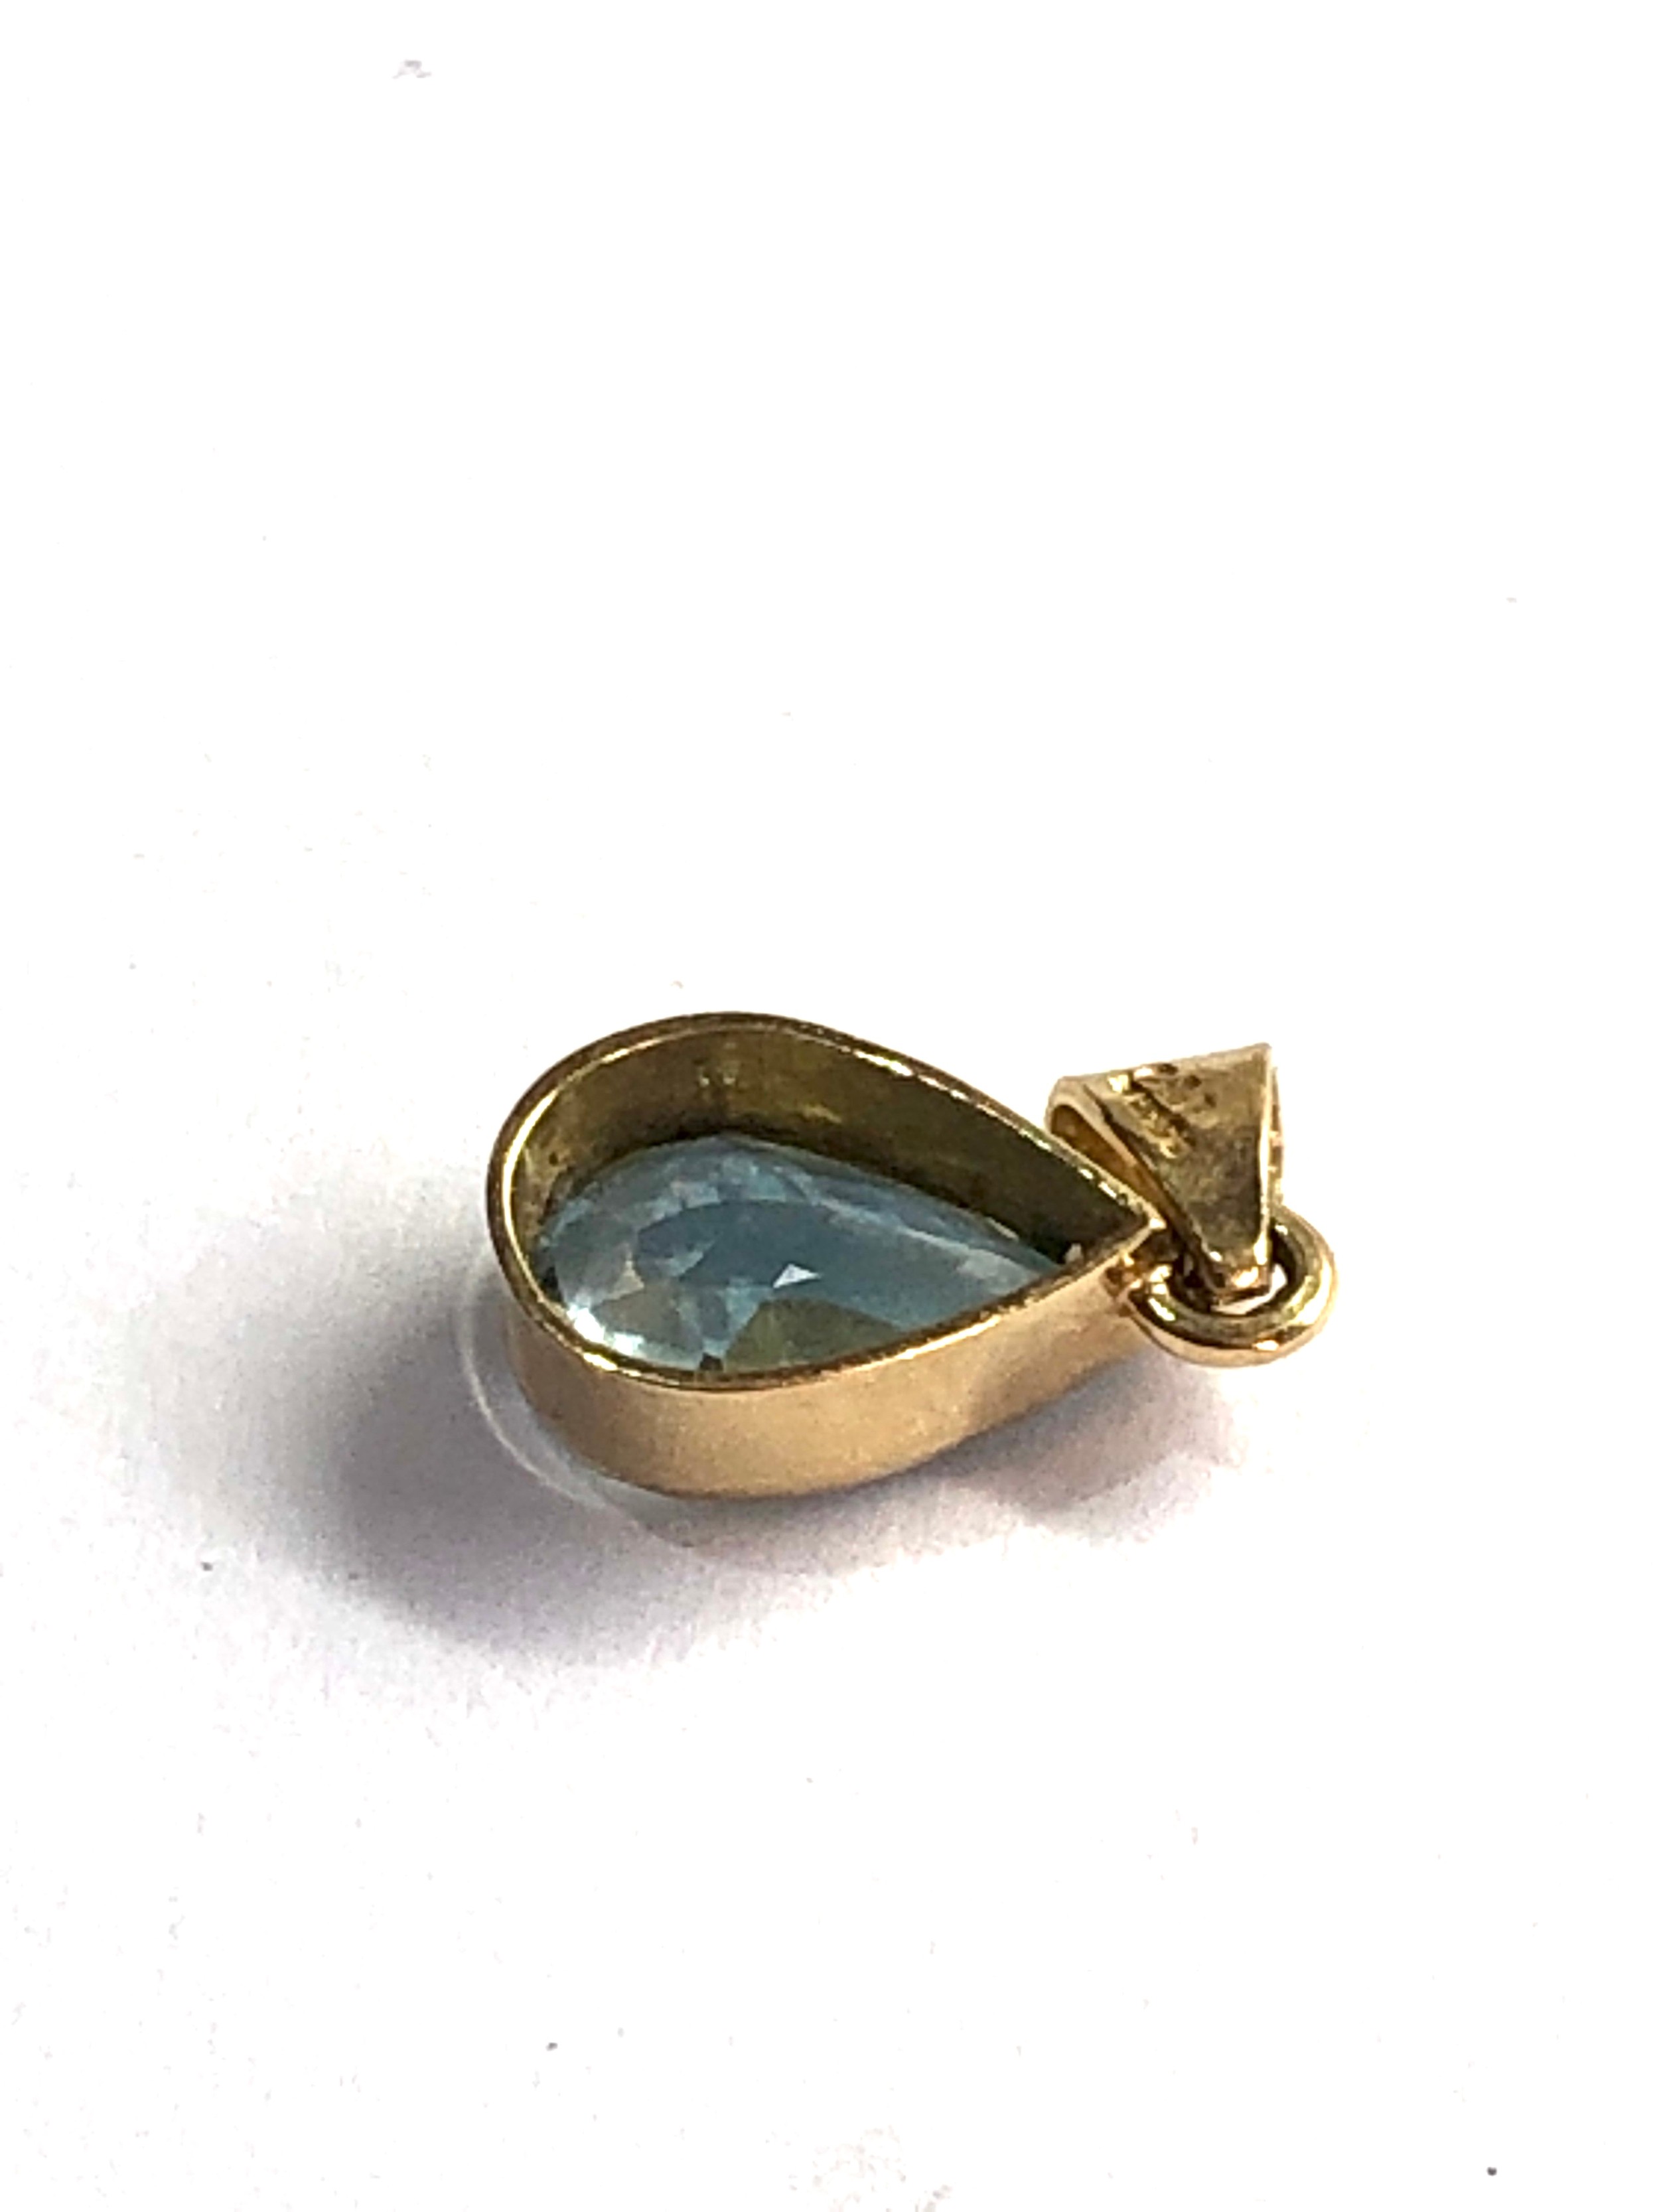 Small 9ct gold topaz pendant 0.7g - Image 3 of 3